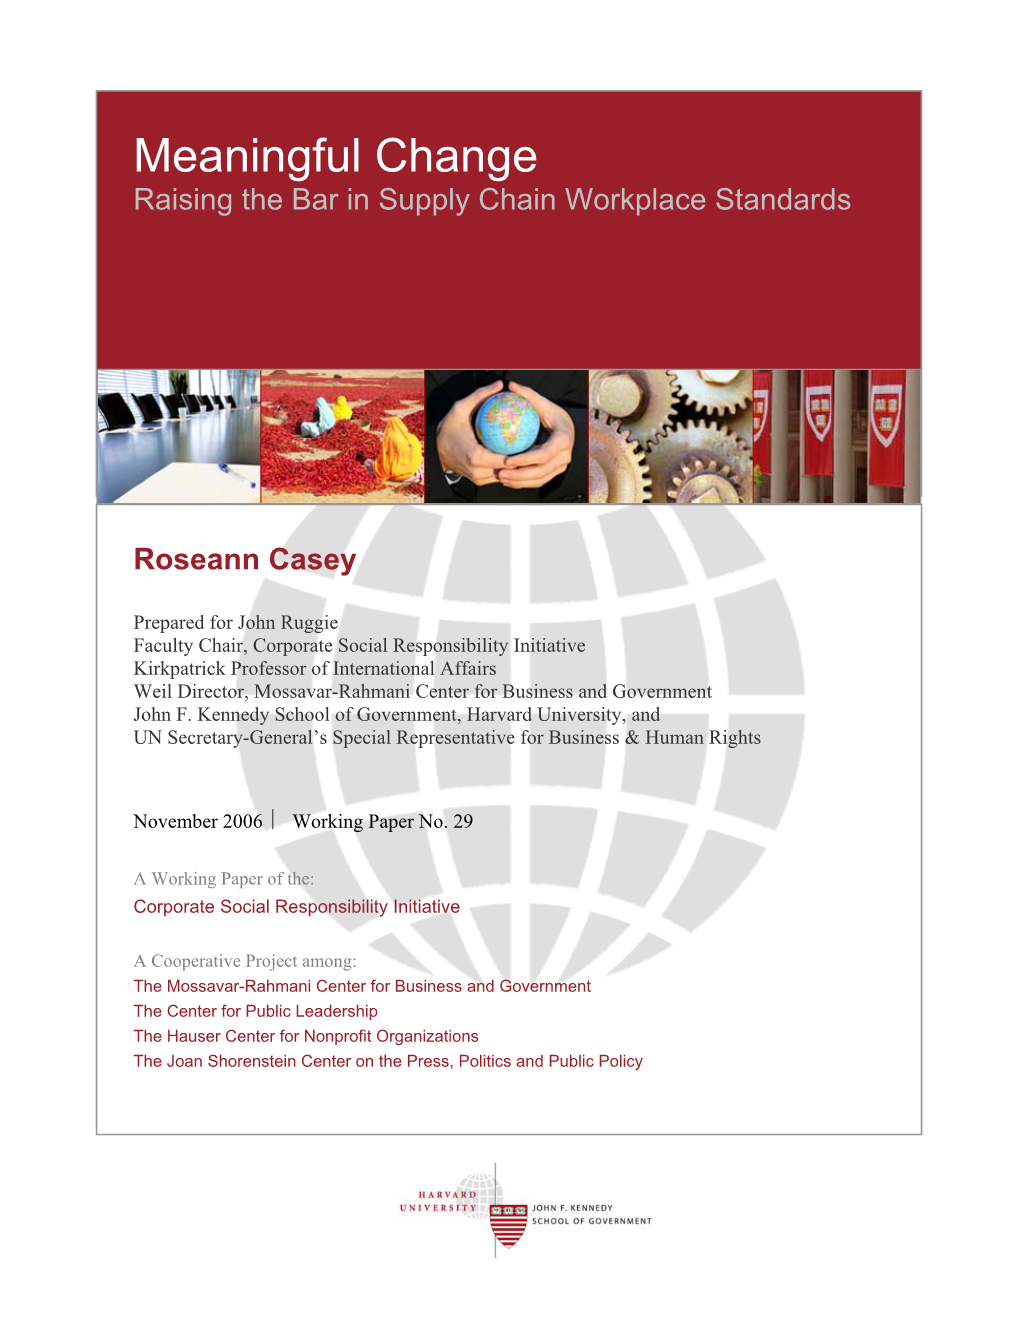 Meaningful Change: Raising the Bar in Supply Chain Workplace Standards.” Corporate Social Responsibility Initiative, Working Paper No